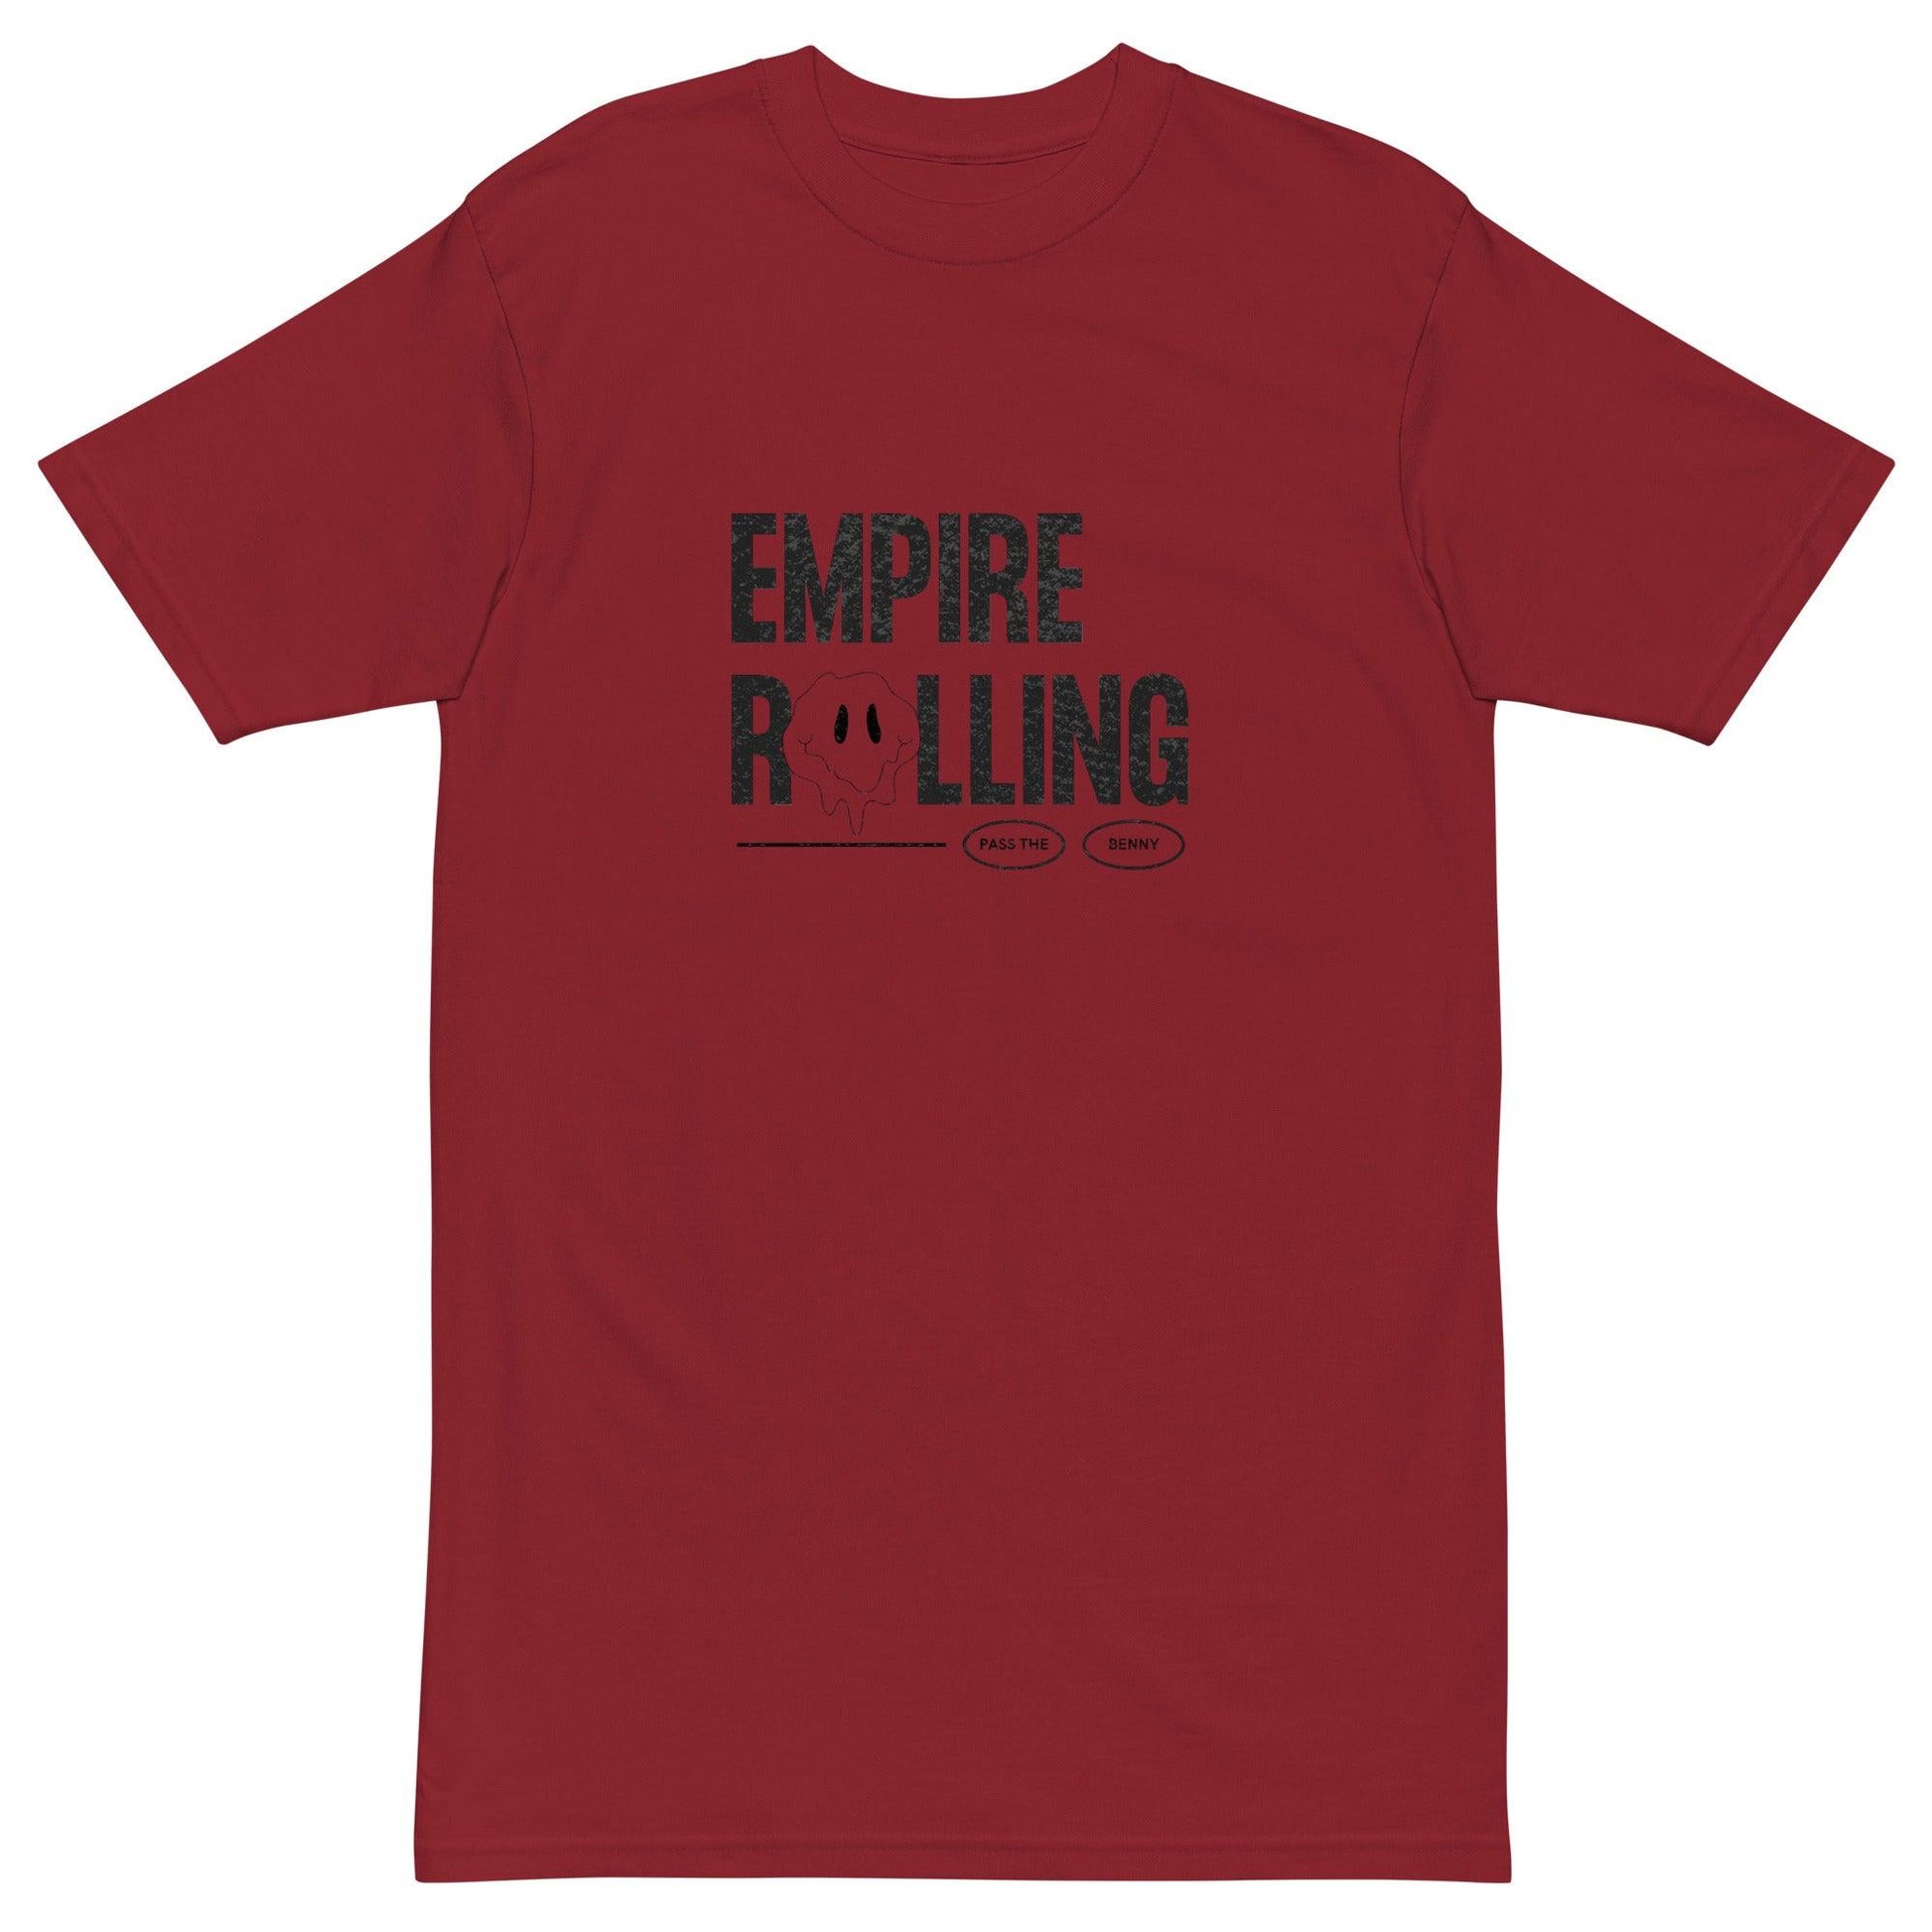 Empire Rolling's King Size Organic Hemp Rolling Papers, eco-friendly and crafted with high-quality, natural materials for a premium smoking experience.Melt Master Crew Tee - Empire Rolling Papers